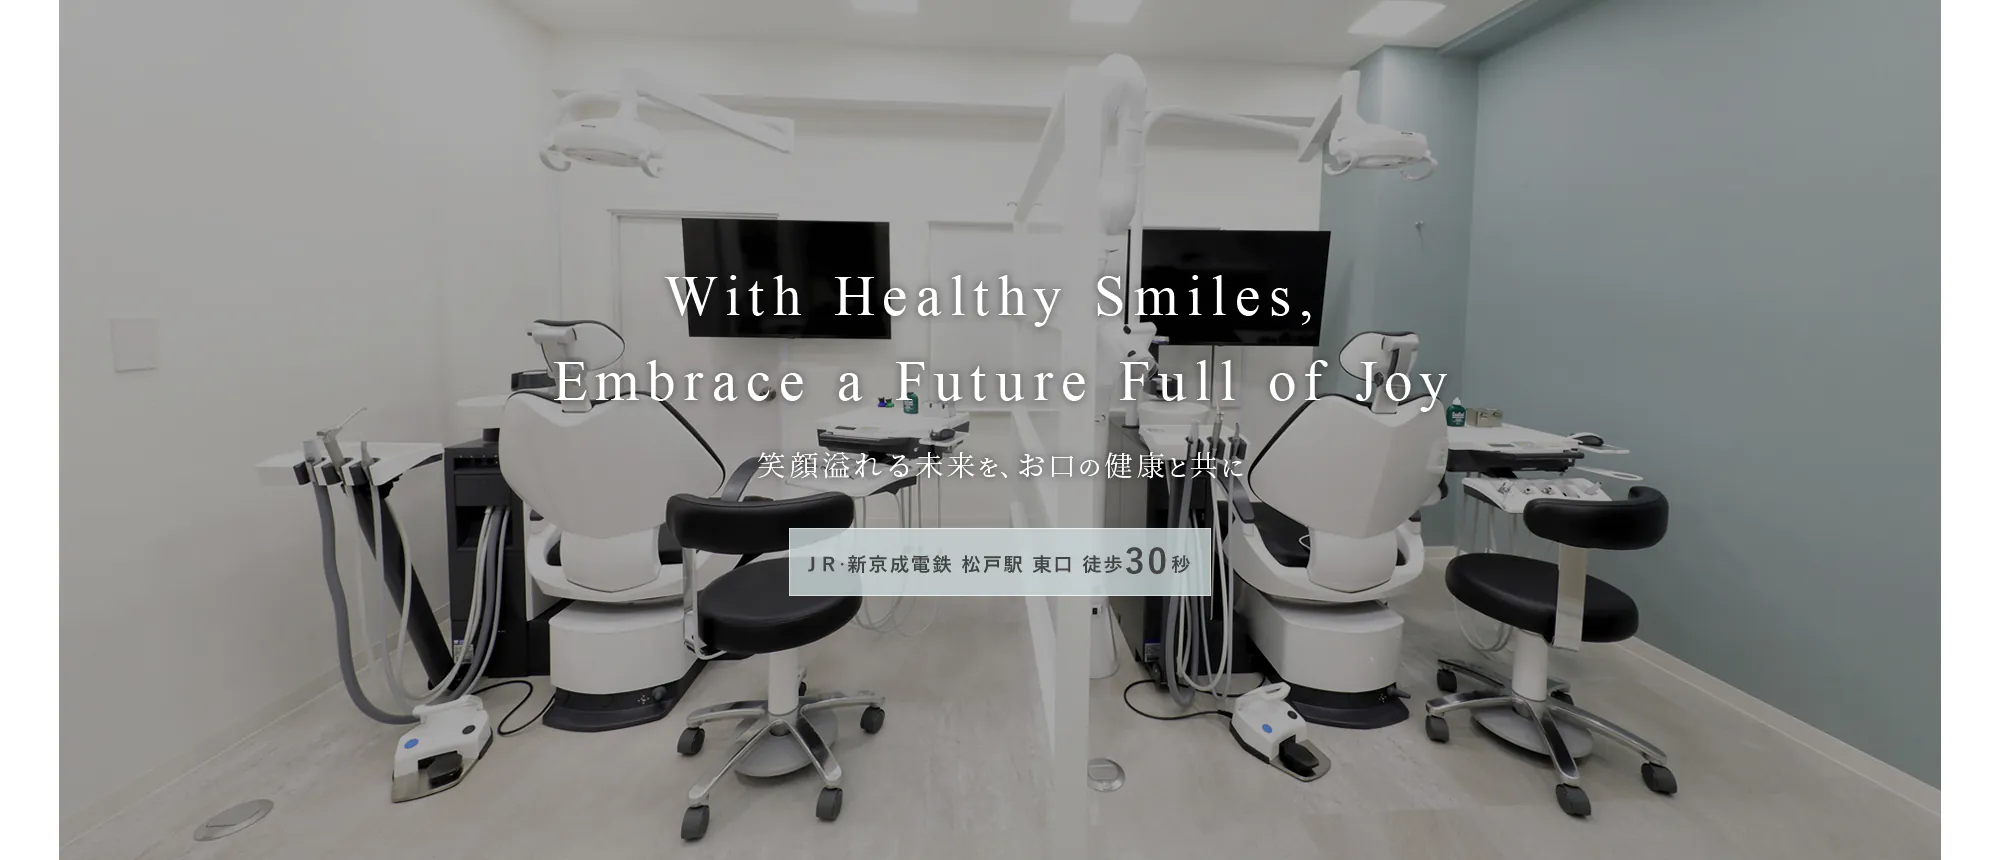 With Healthy Smiles,  Embrace a Future Full of Joy 笑顔溢れる未来を、お口の健康と共に